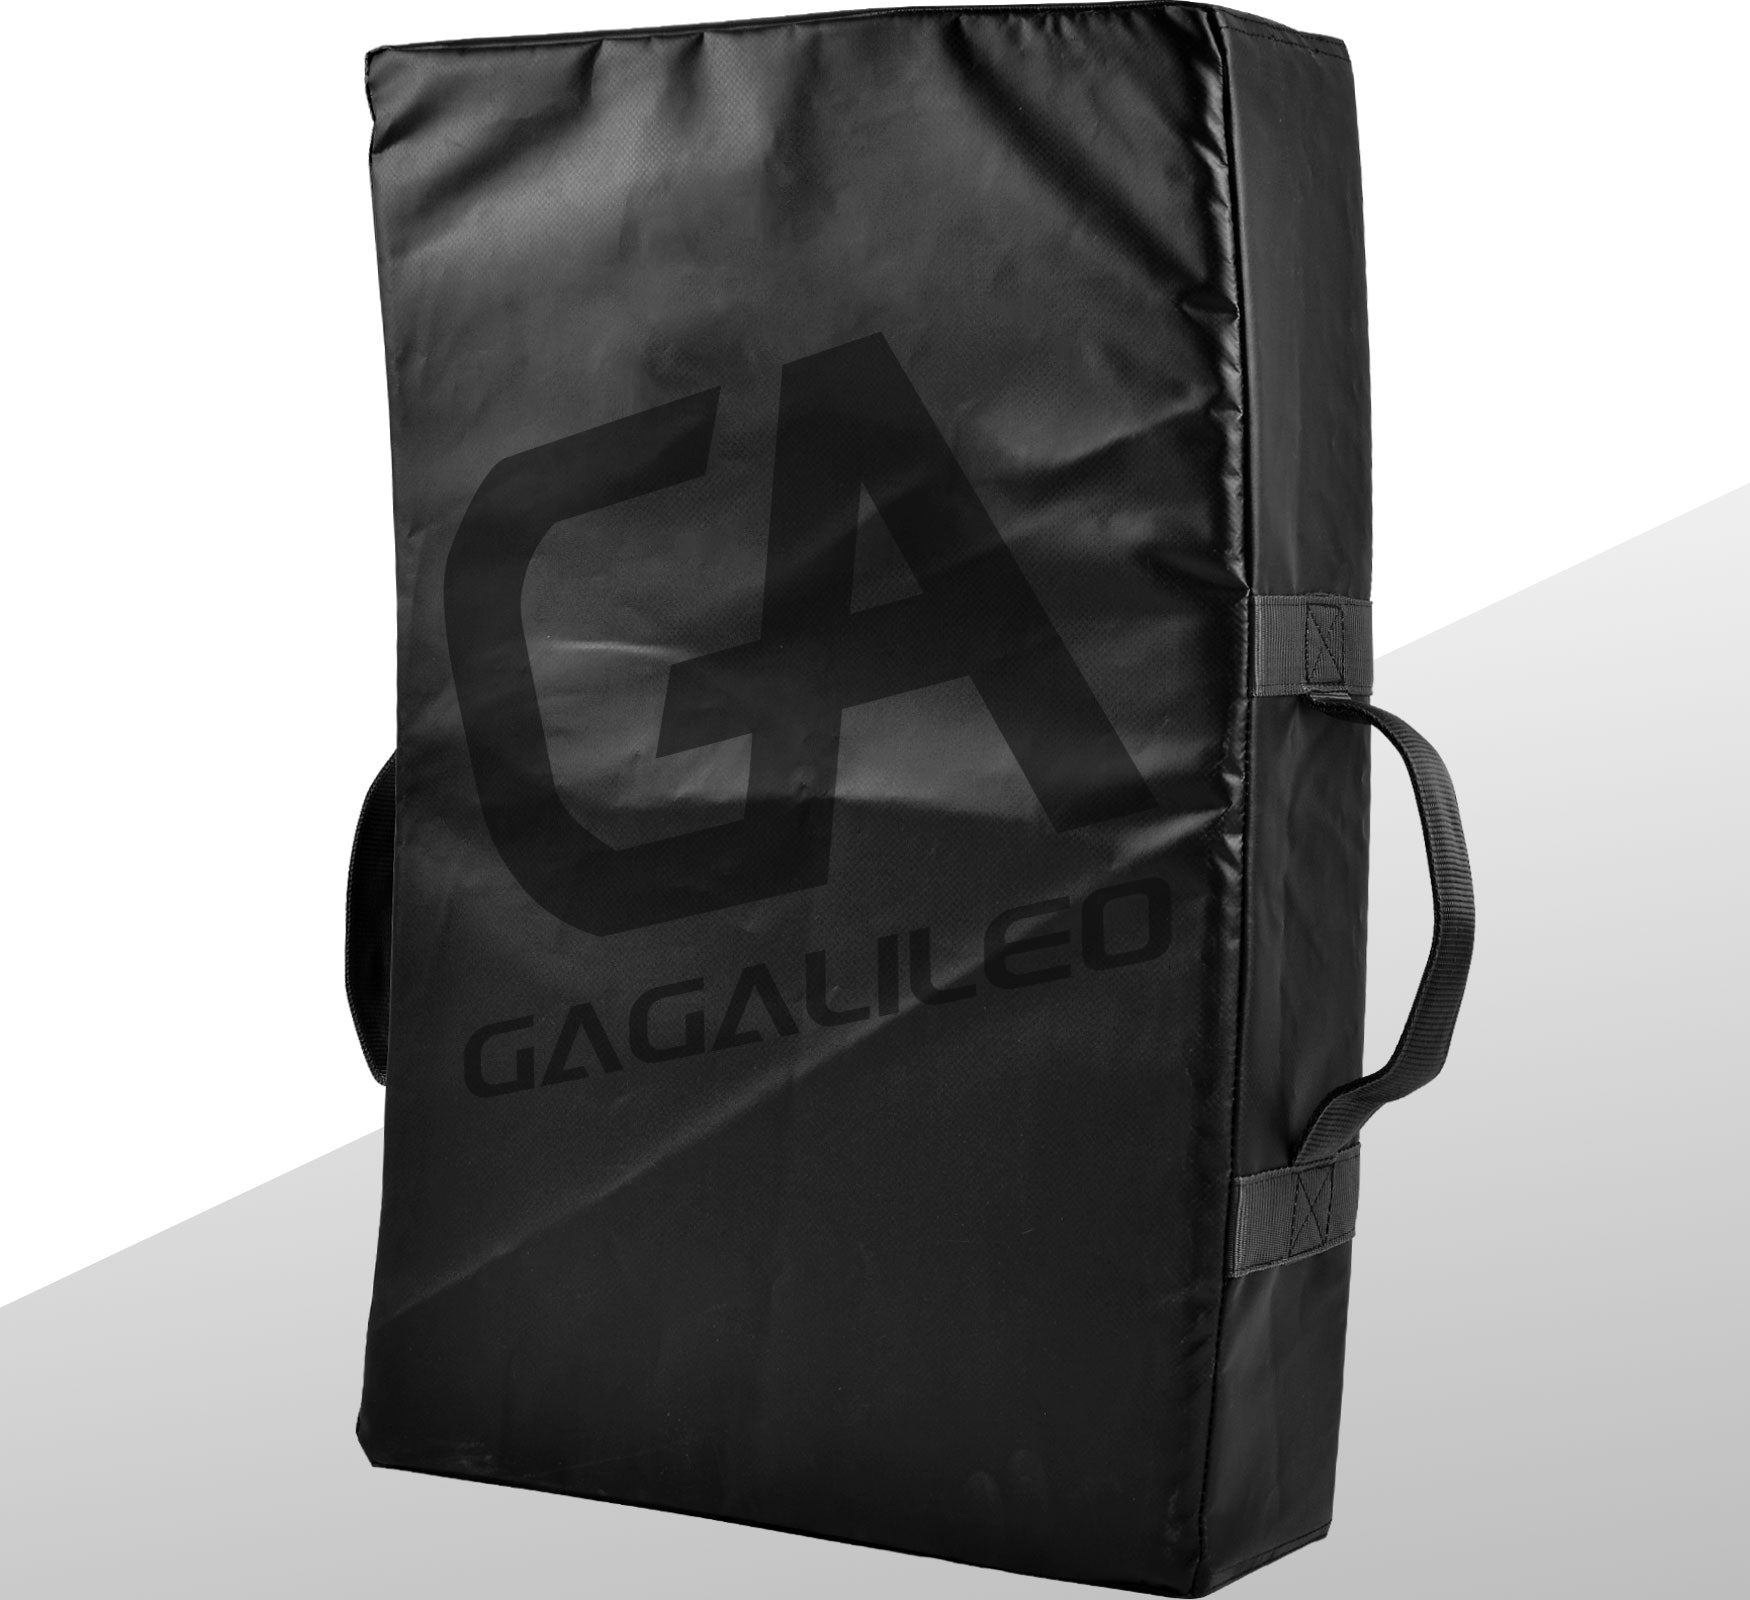 Gagalileo Bloking Pad,Maximize Your Training Multi-Sport Blocking Pad - Durable Synthetic Leather, High-Density Foam Core, Extra Large